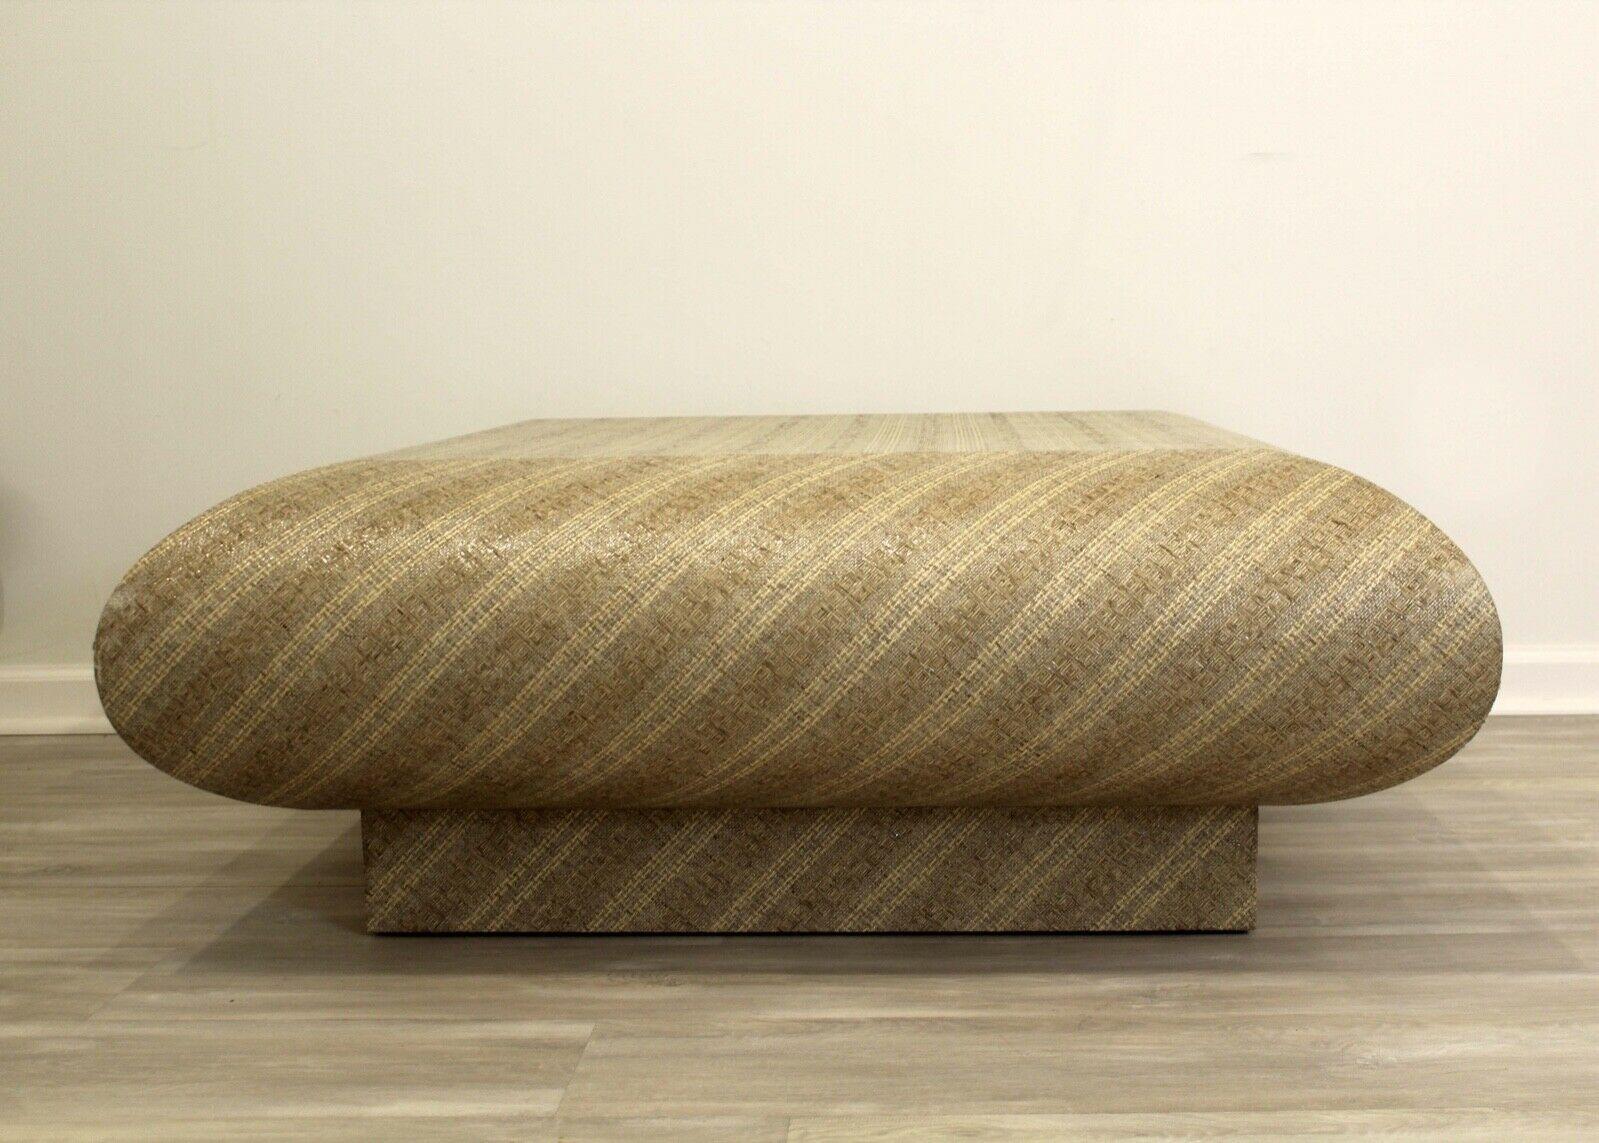 Postmodern Grasscloth Floating Coffee Table In Good Condition For Sale In Keego Harbor, MI